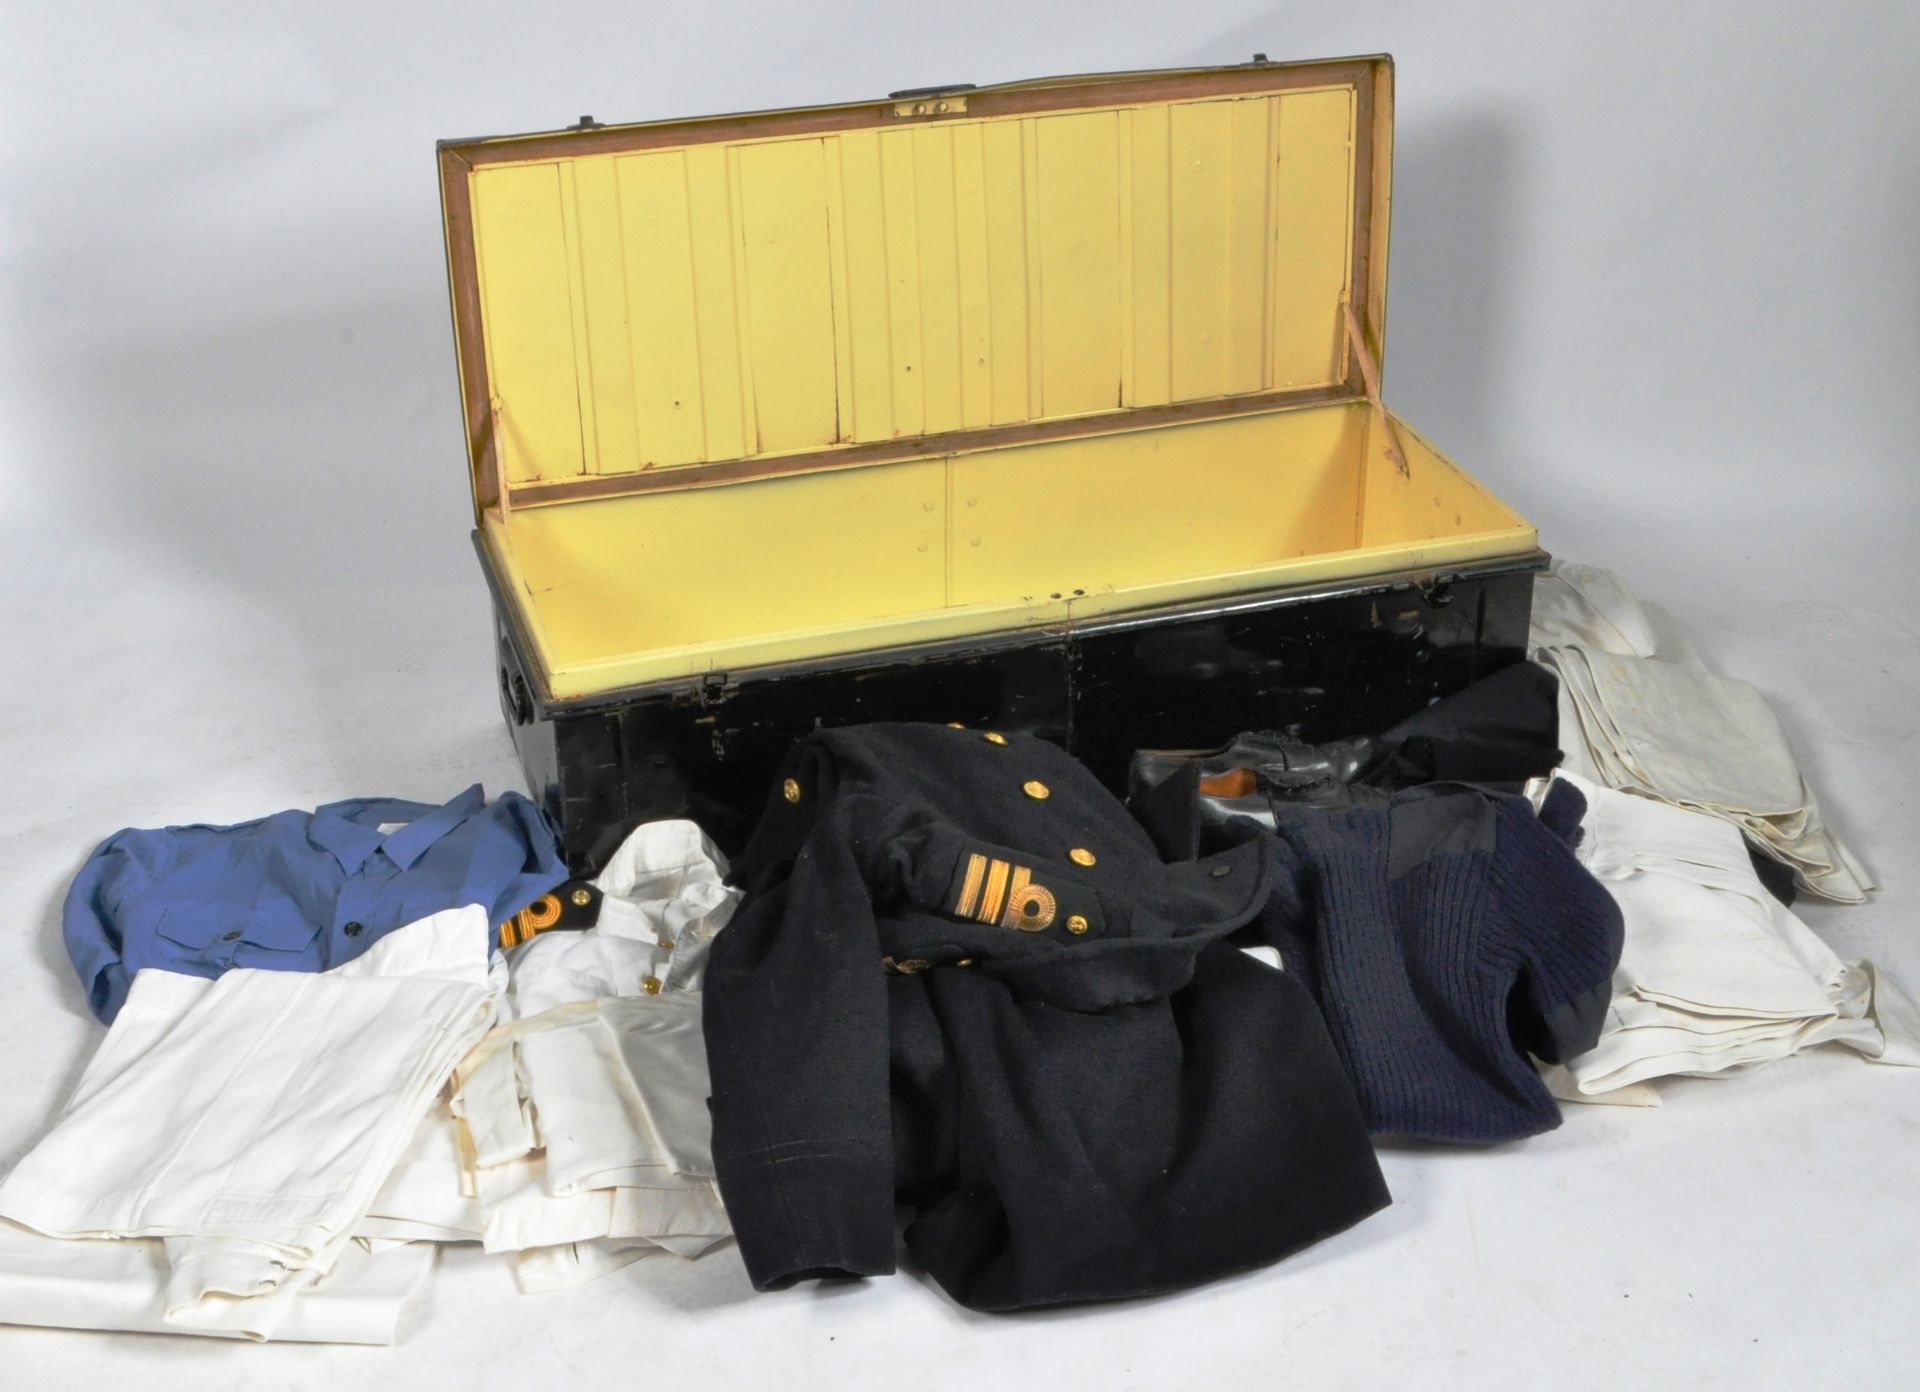 COLLECTION OF POST WAR ROYAL NAVY COMMANDERS UNIFORM ITEMS